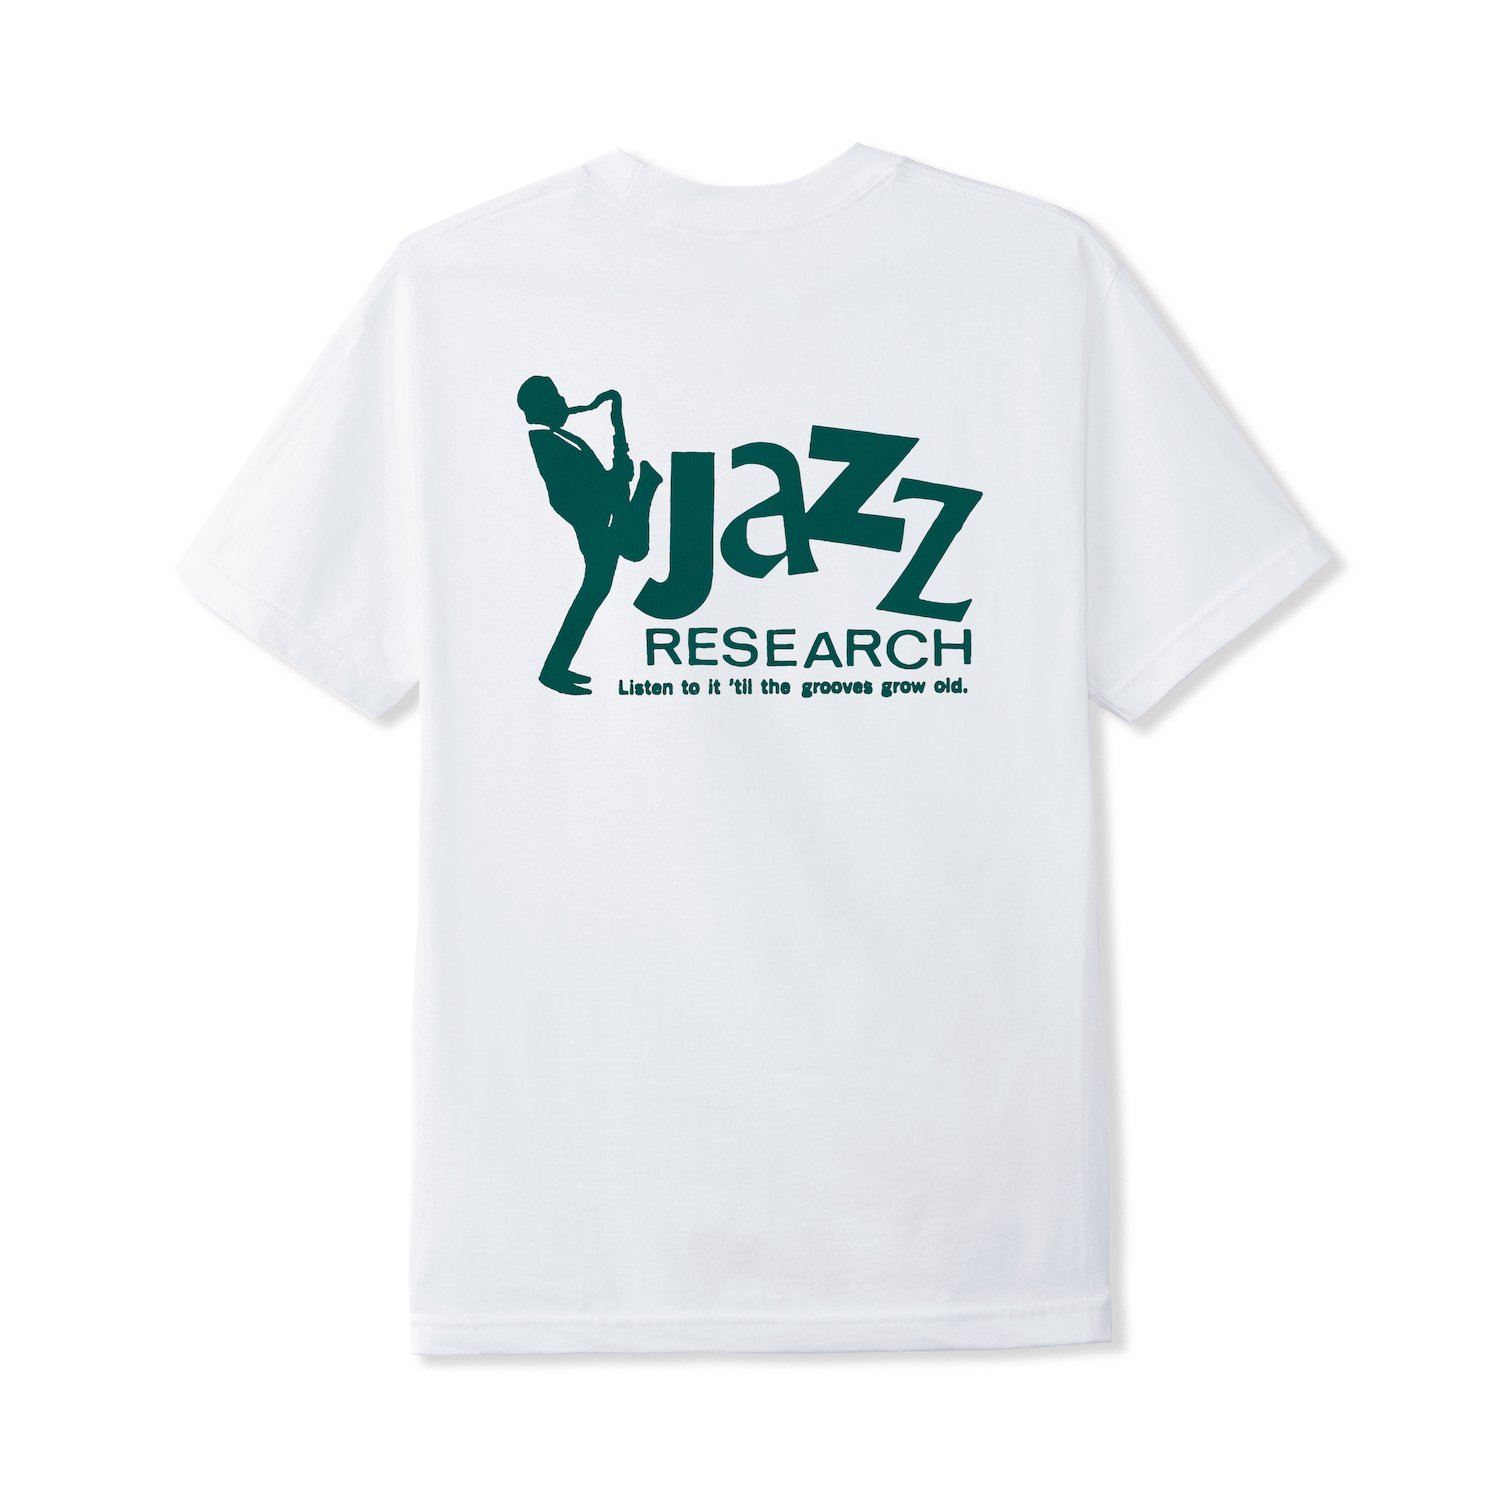 BUTTER GOODS<br>Jazz Research S/S Tee<br>